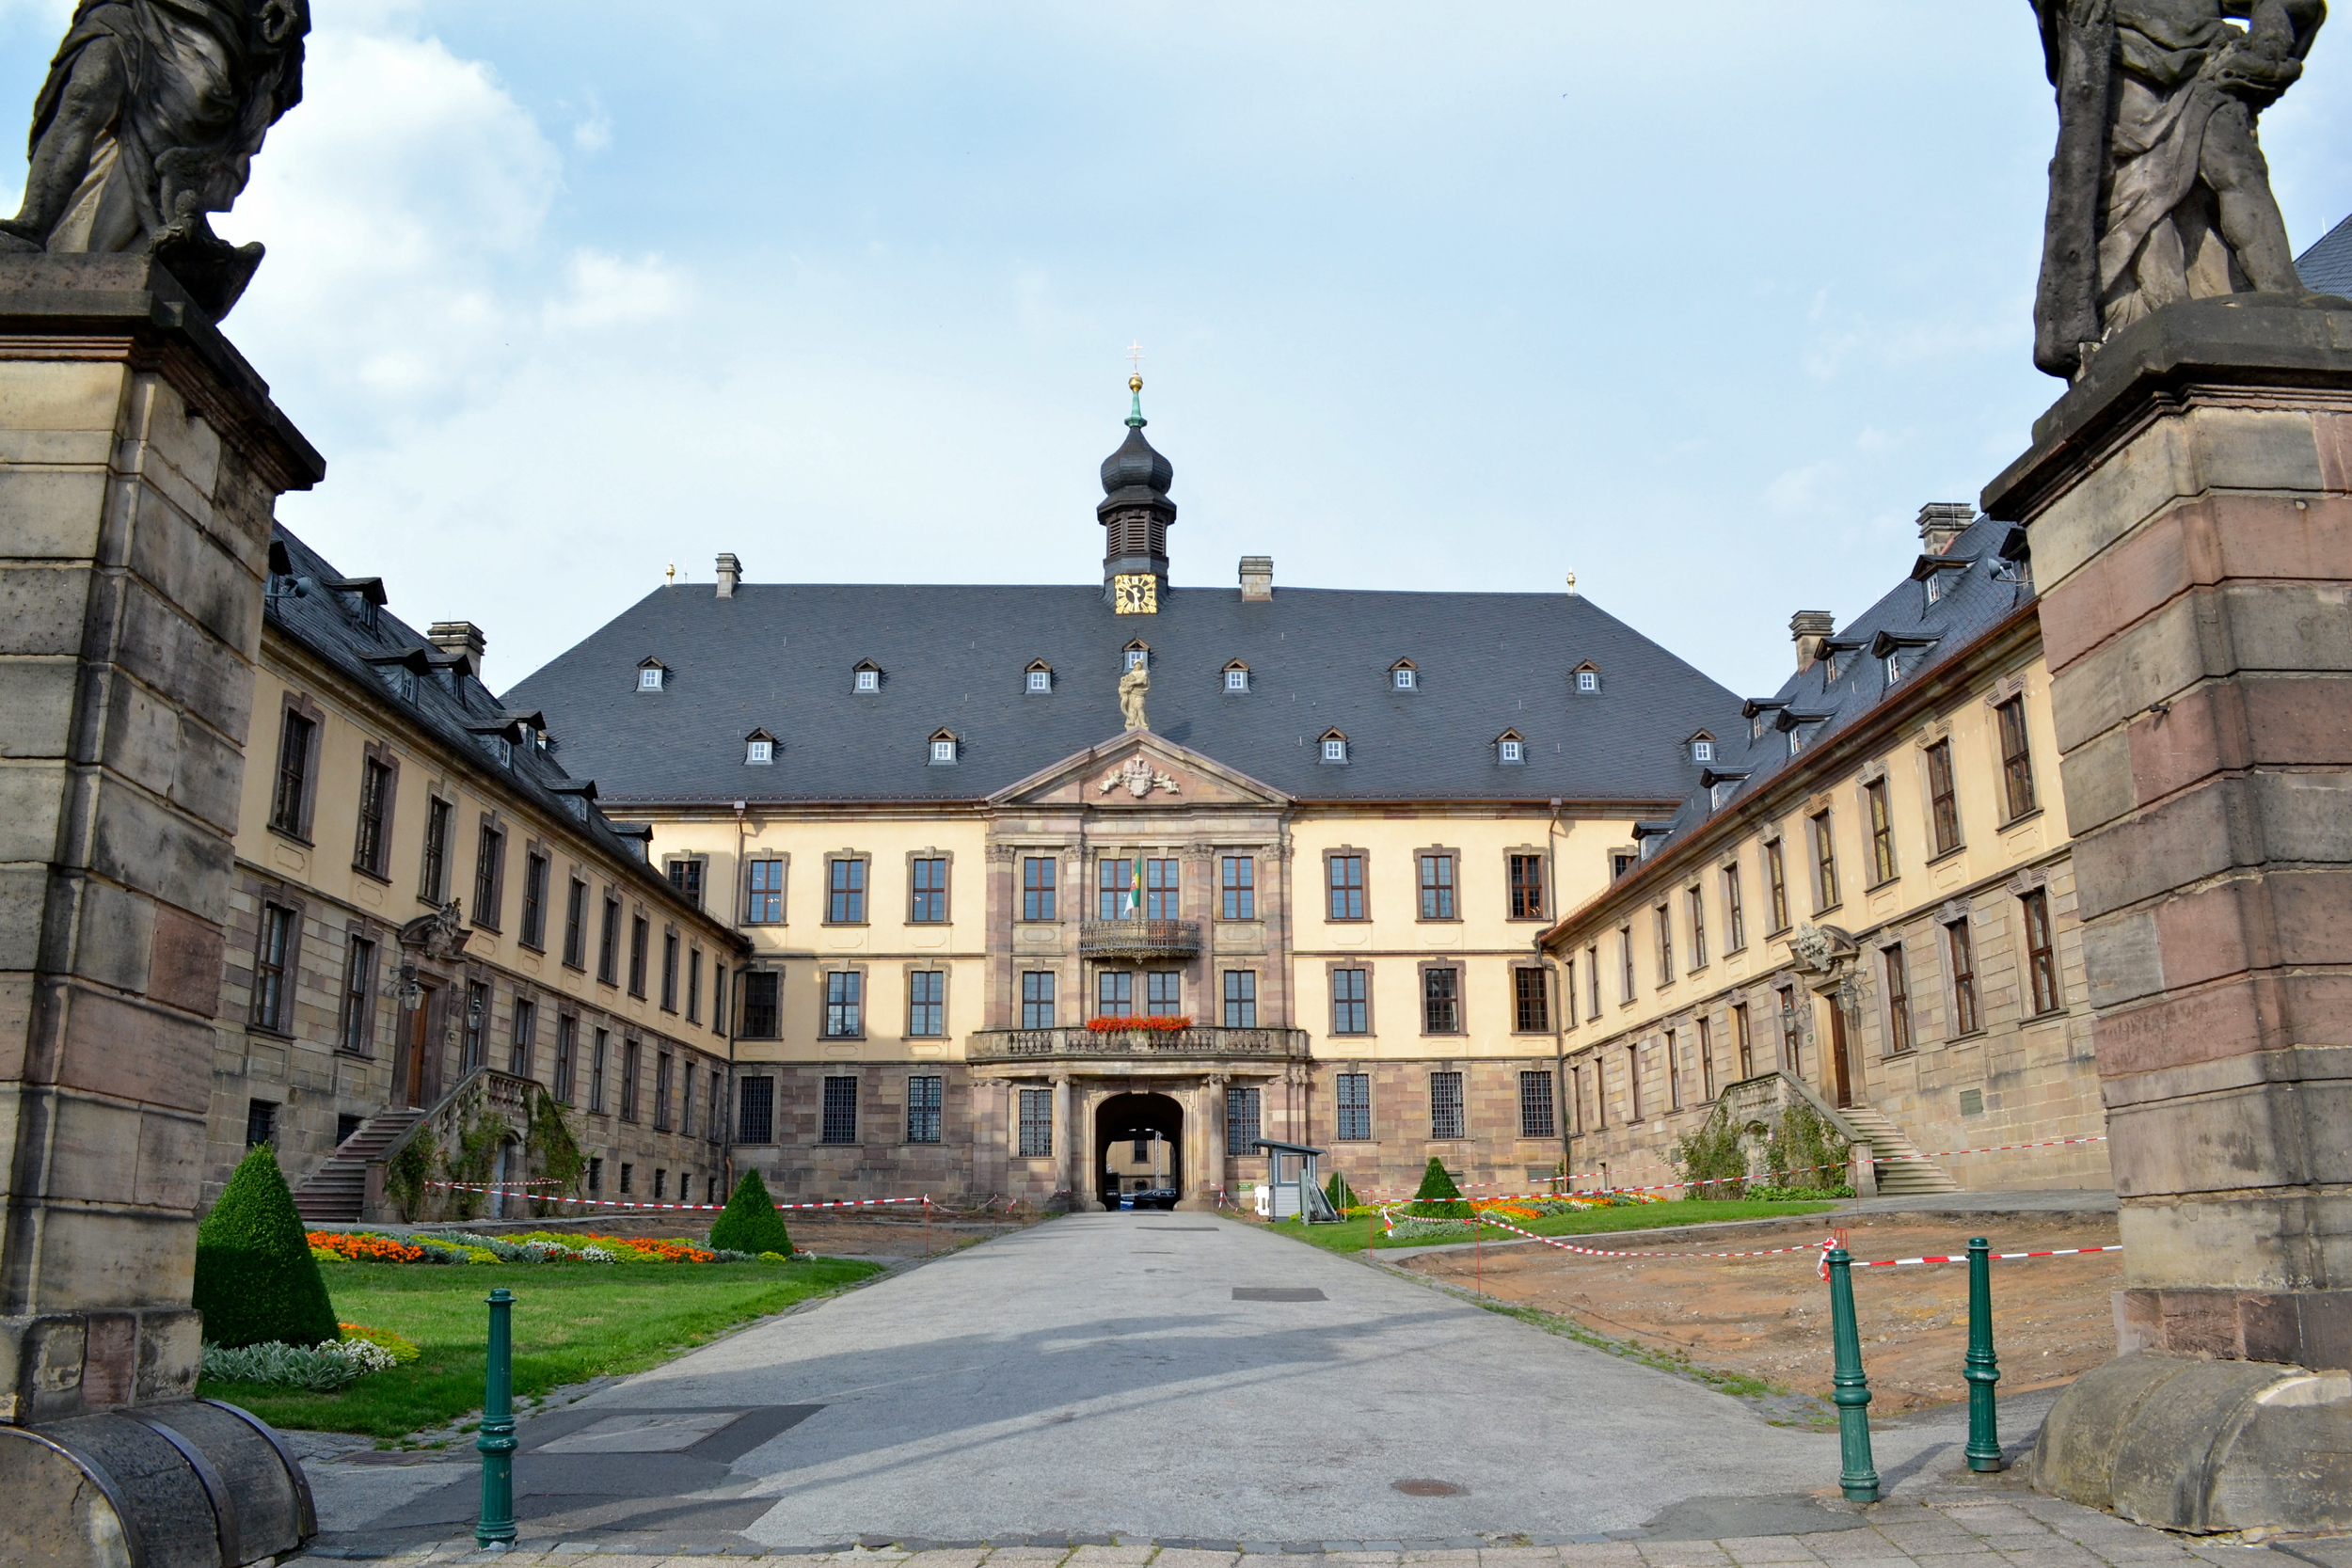  This is the Stadtschloss, an early 18th-century palace.  